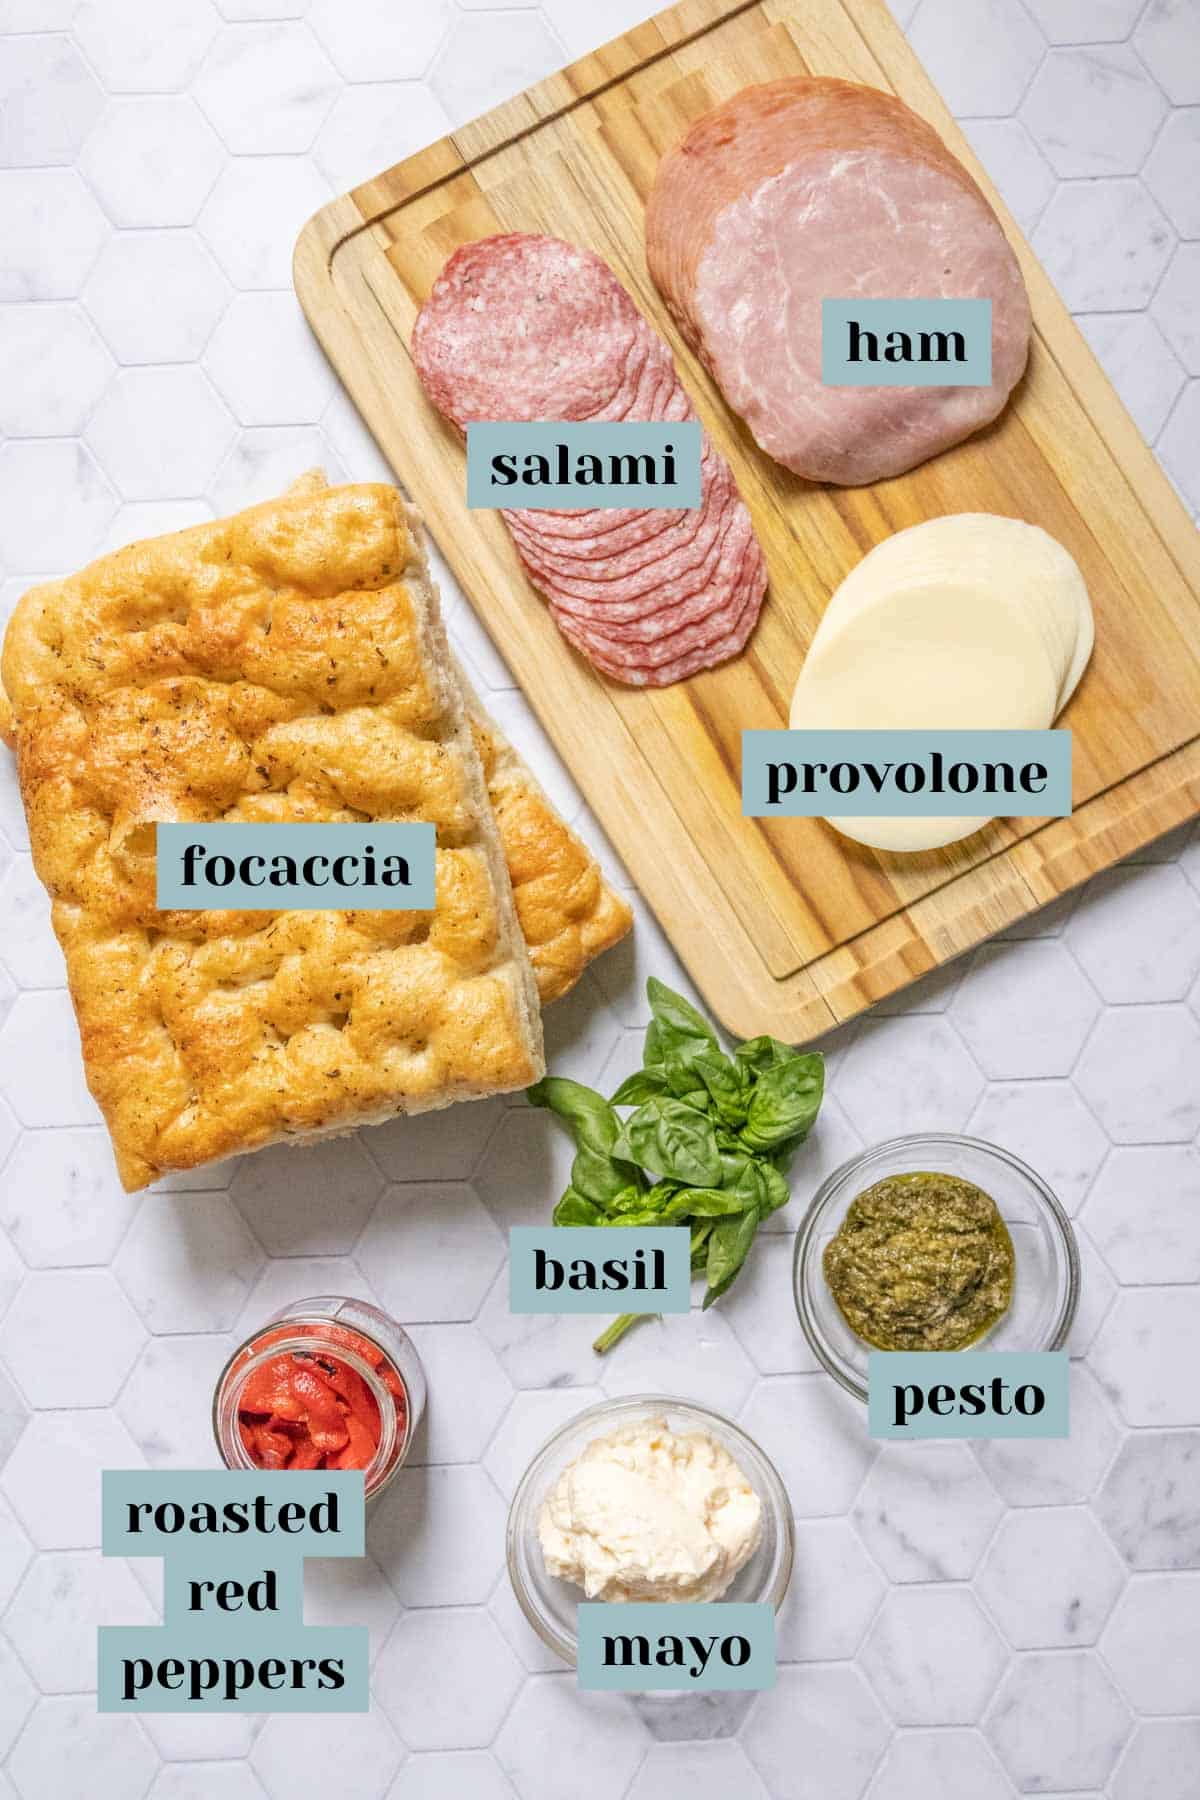 Ingredients for pressed Italian sandwiches on a tile surface with labels.